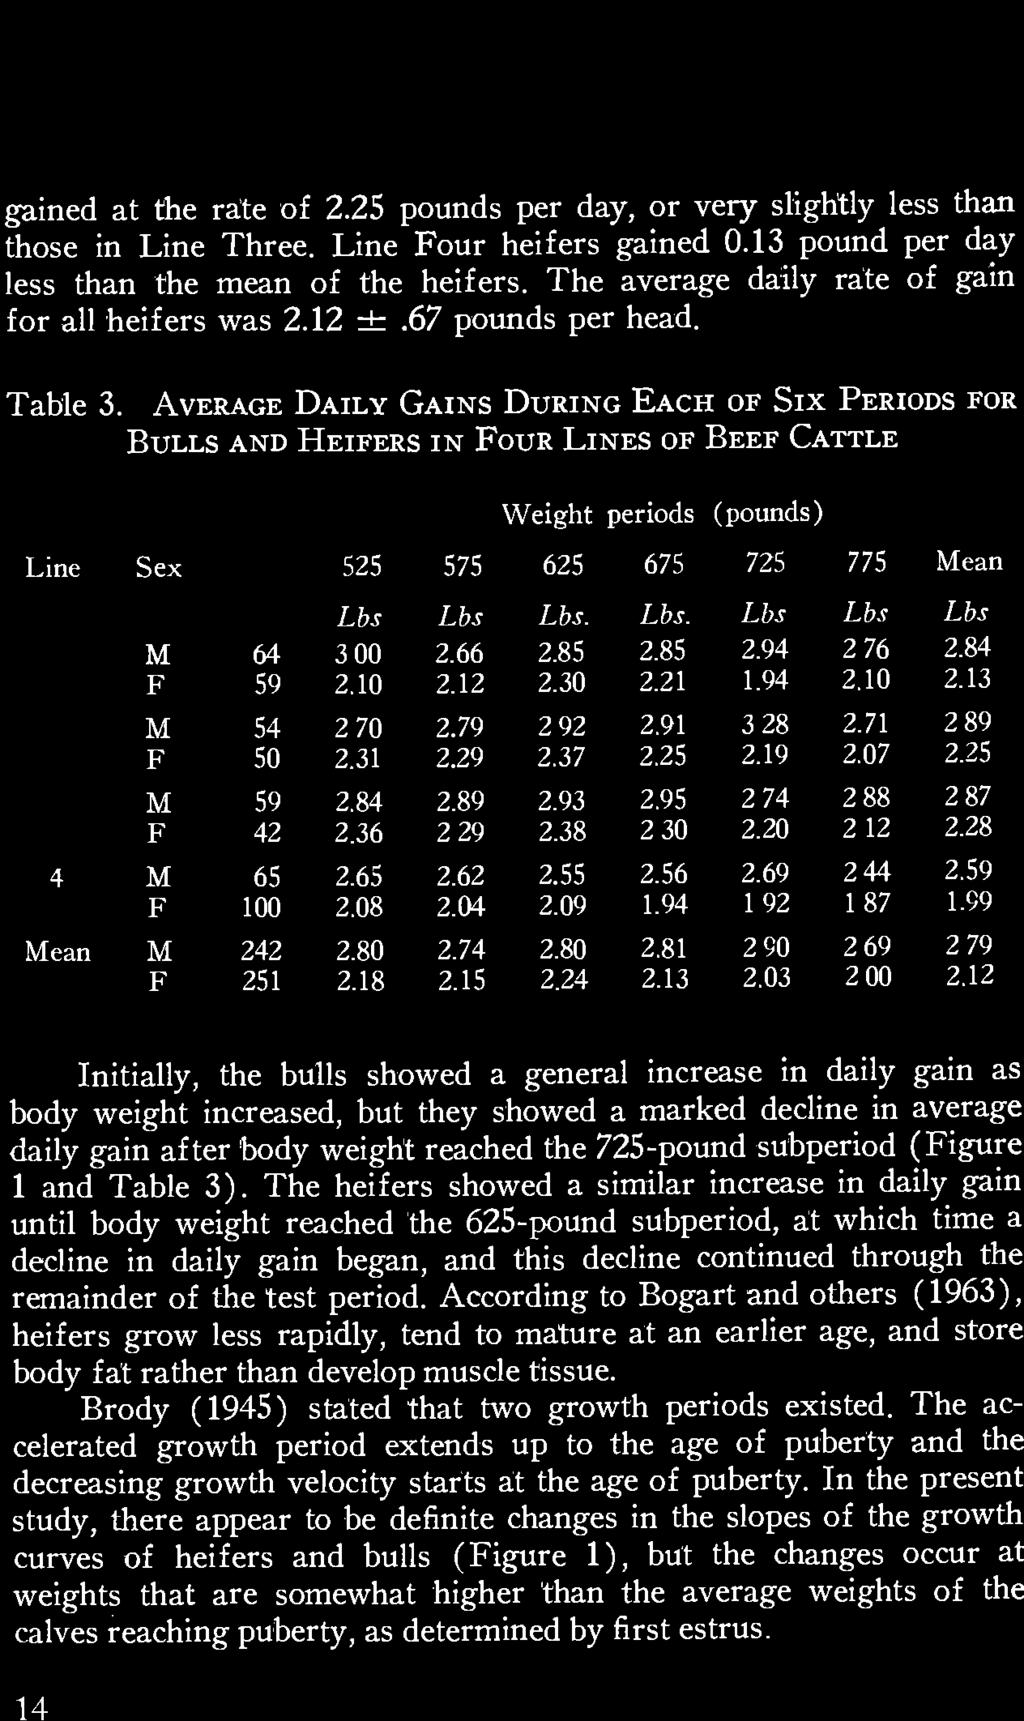 pounds for bulls in Line Two (Prince). For the test period (period required for the animals to gain 300 pounds), the bulls of the four lines combined gained 2.79 ± 0.68 pounds per head per day.